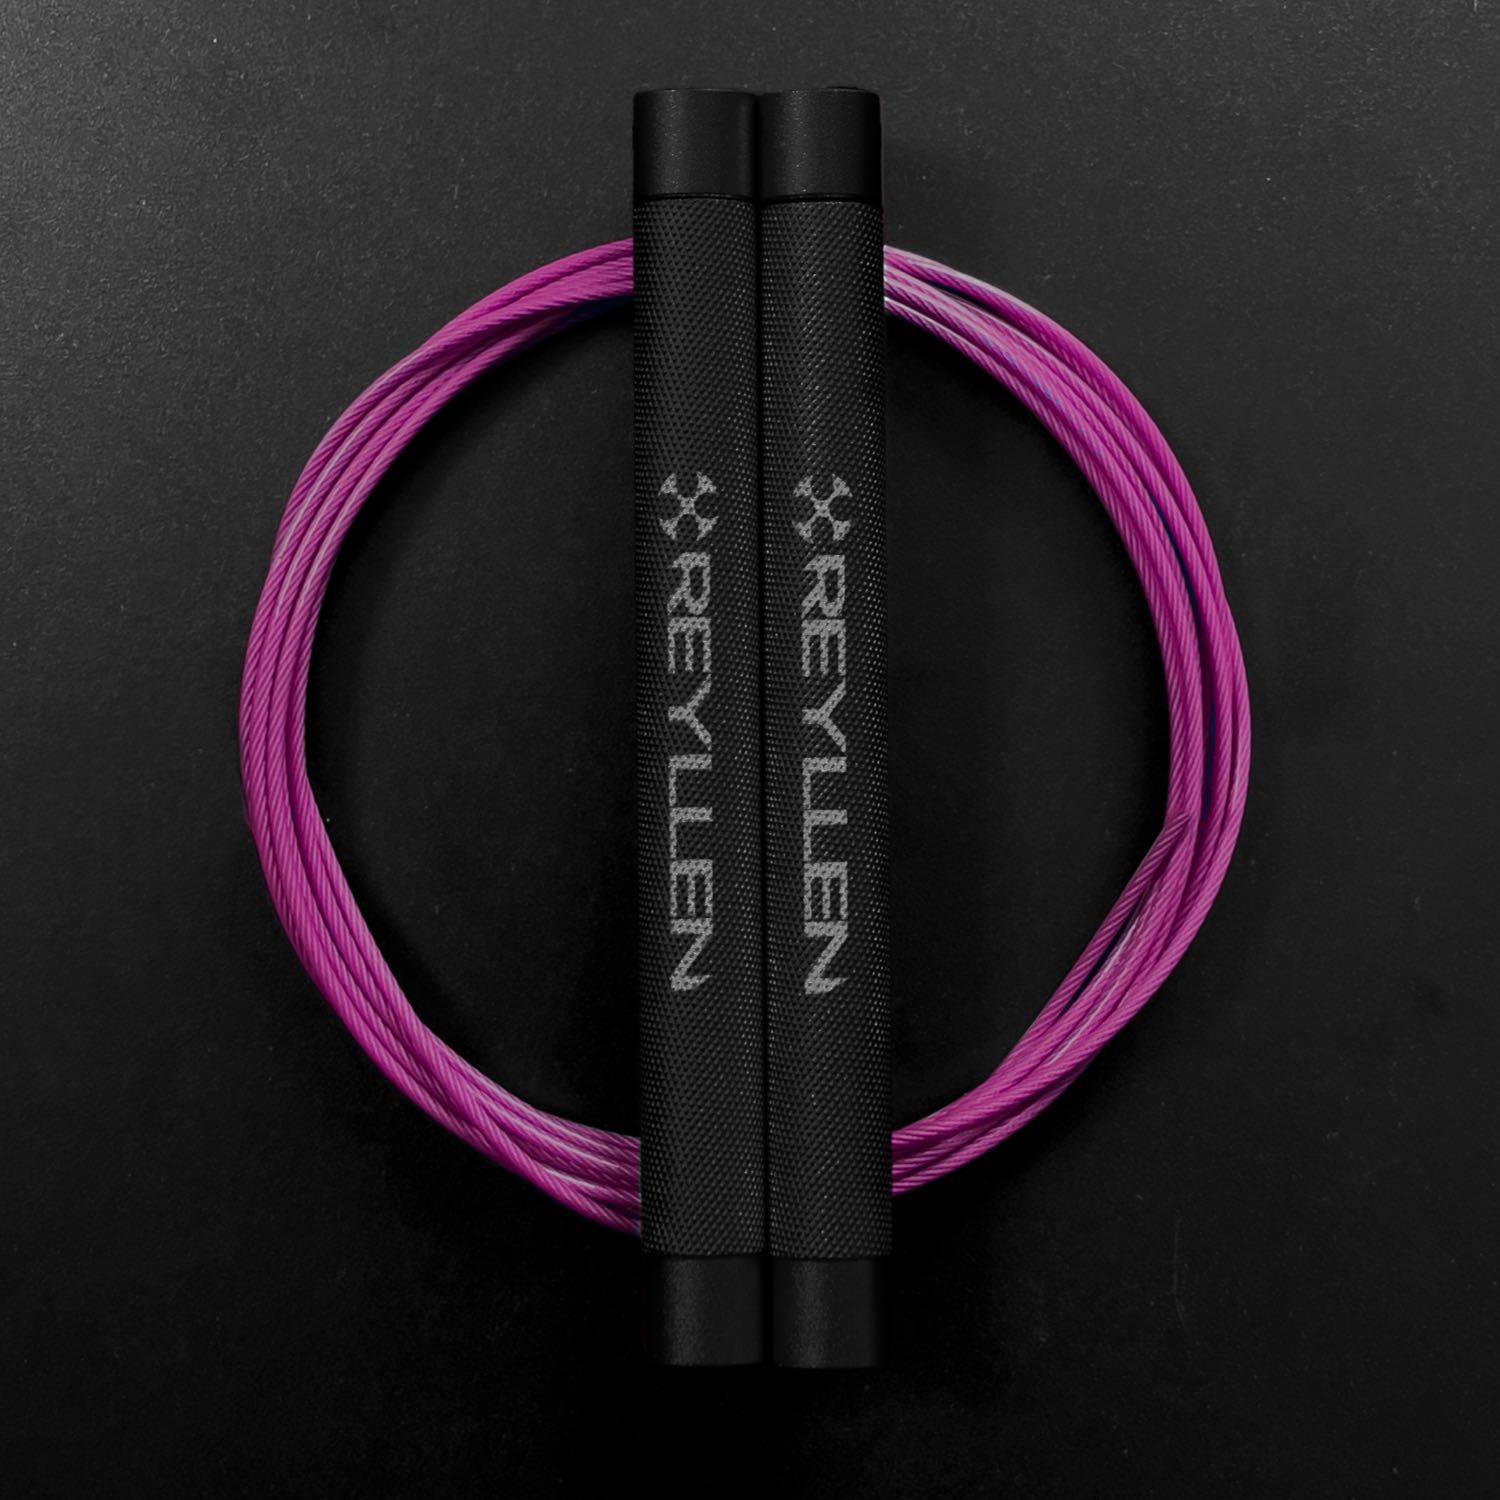 Reyllen Flare Mx Speed Skipping Jump Rope - Aluminium Handles - black with pink nylon coated cable